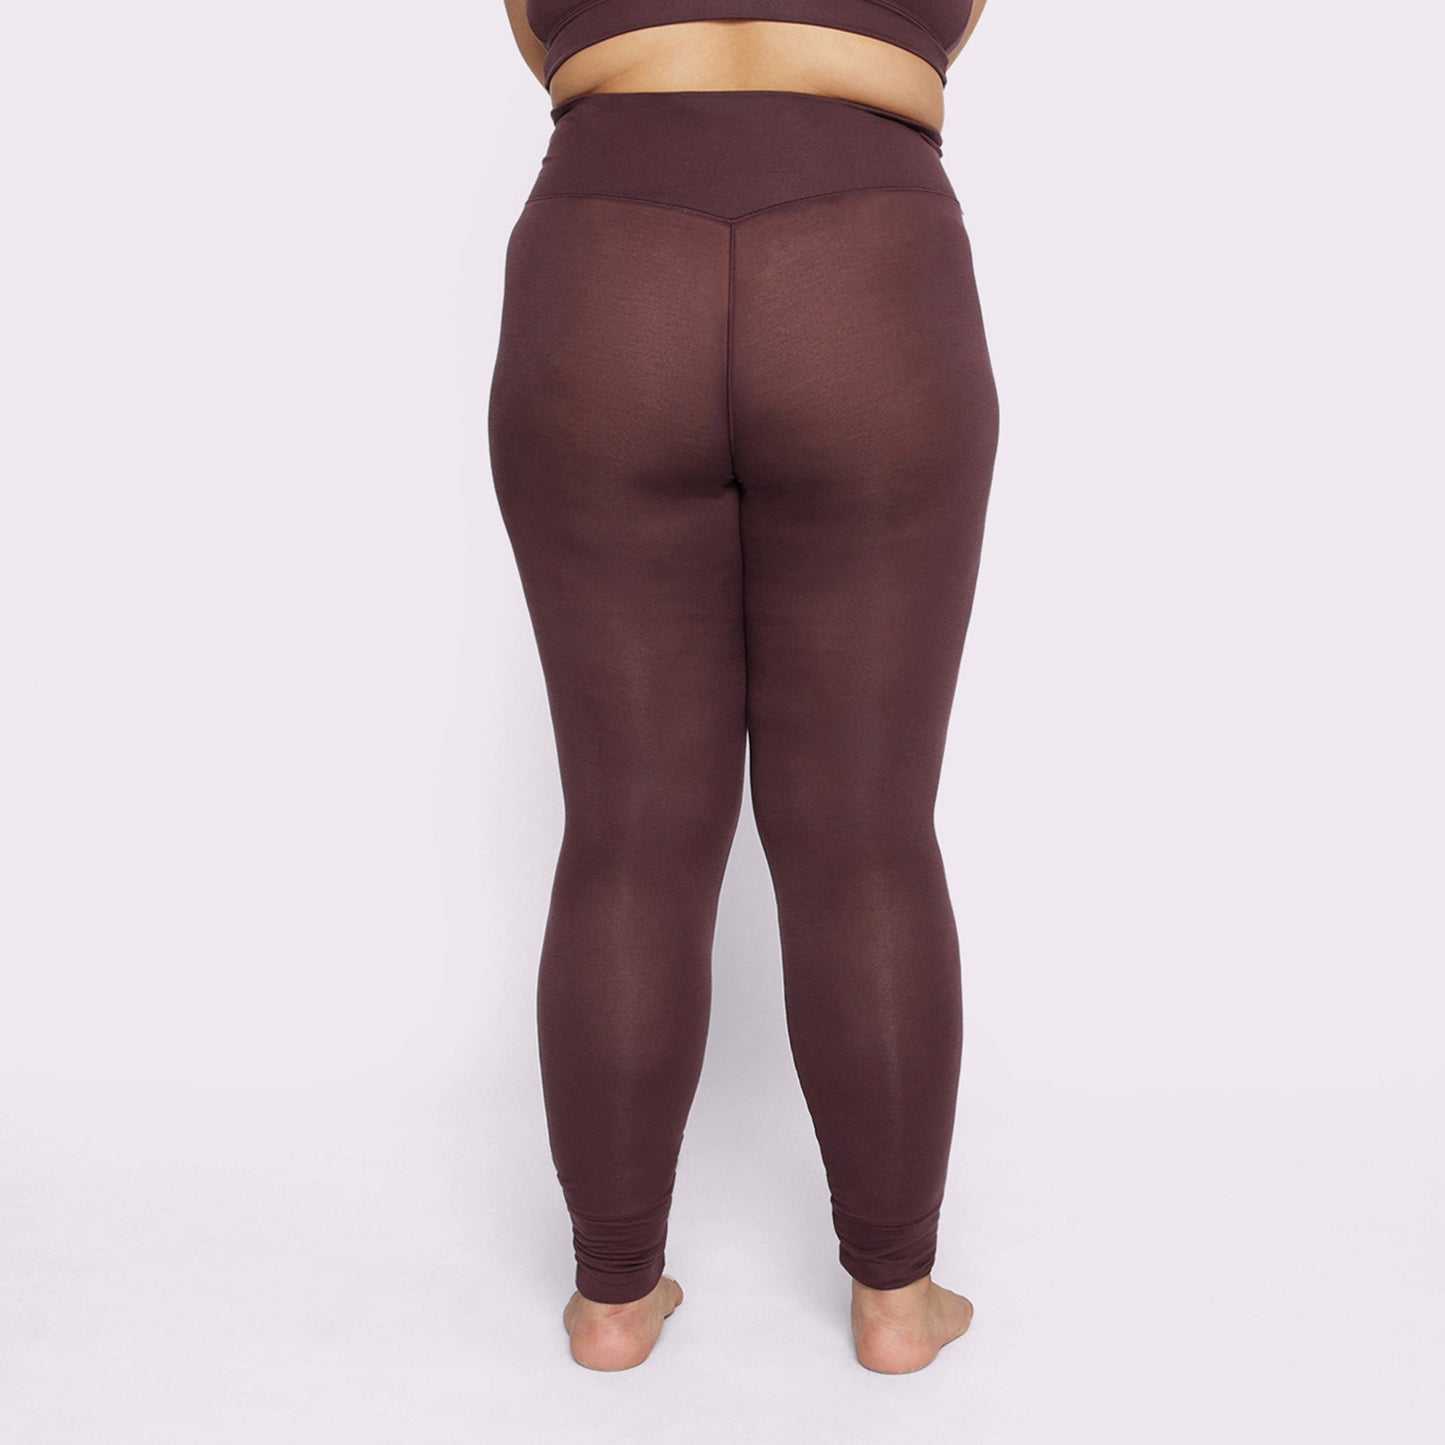 SuperSoft Warm Thermal Leggings | SuperSoft | Archive (Espresso)